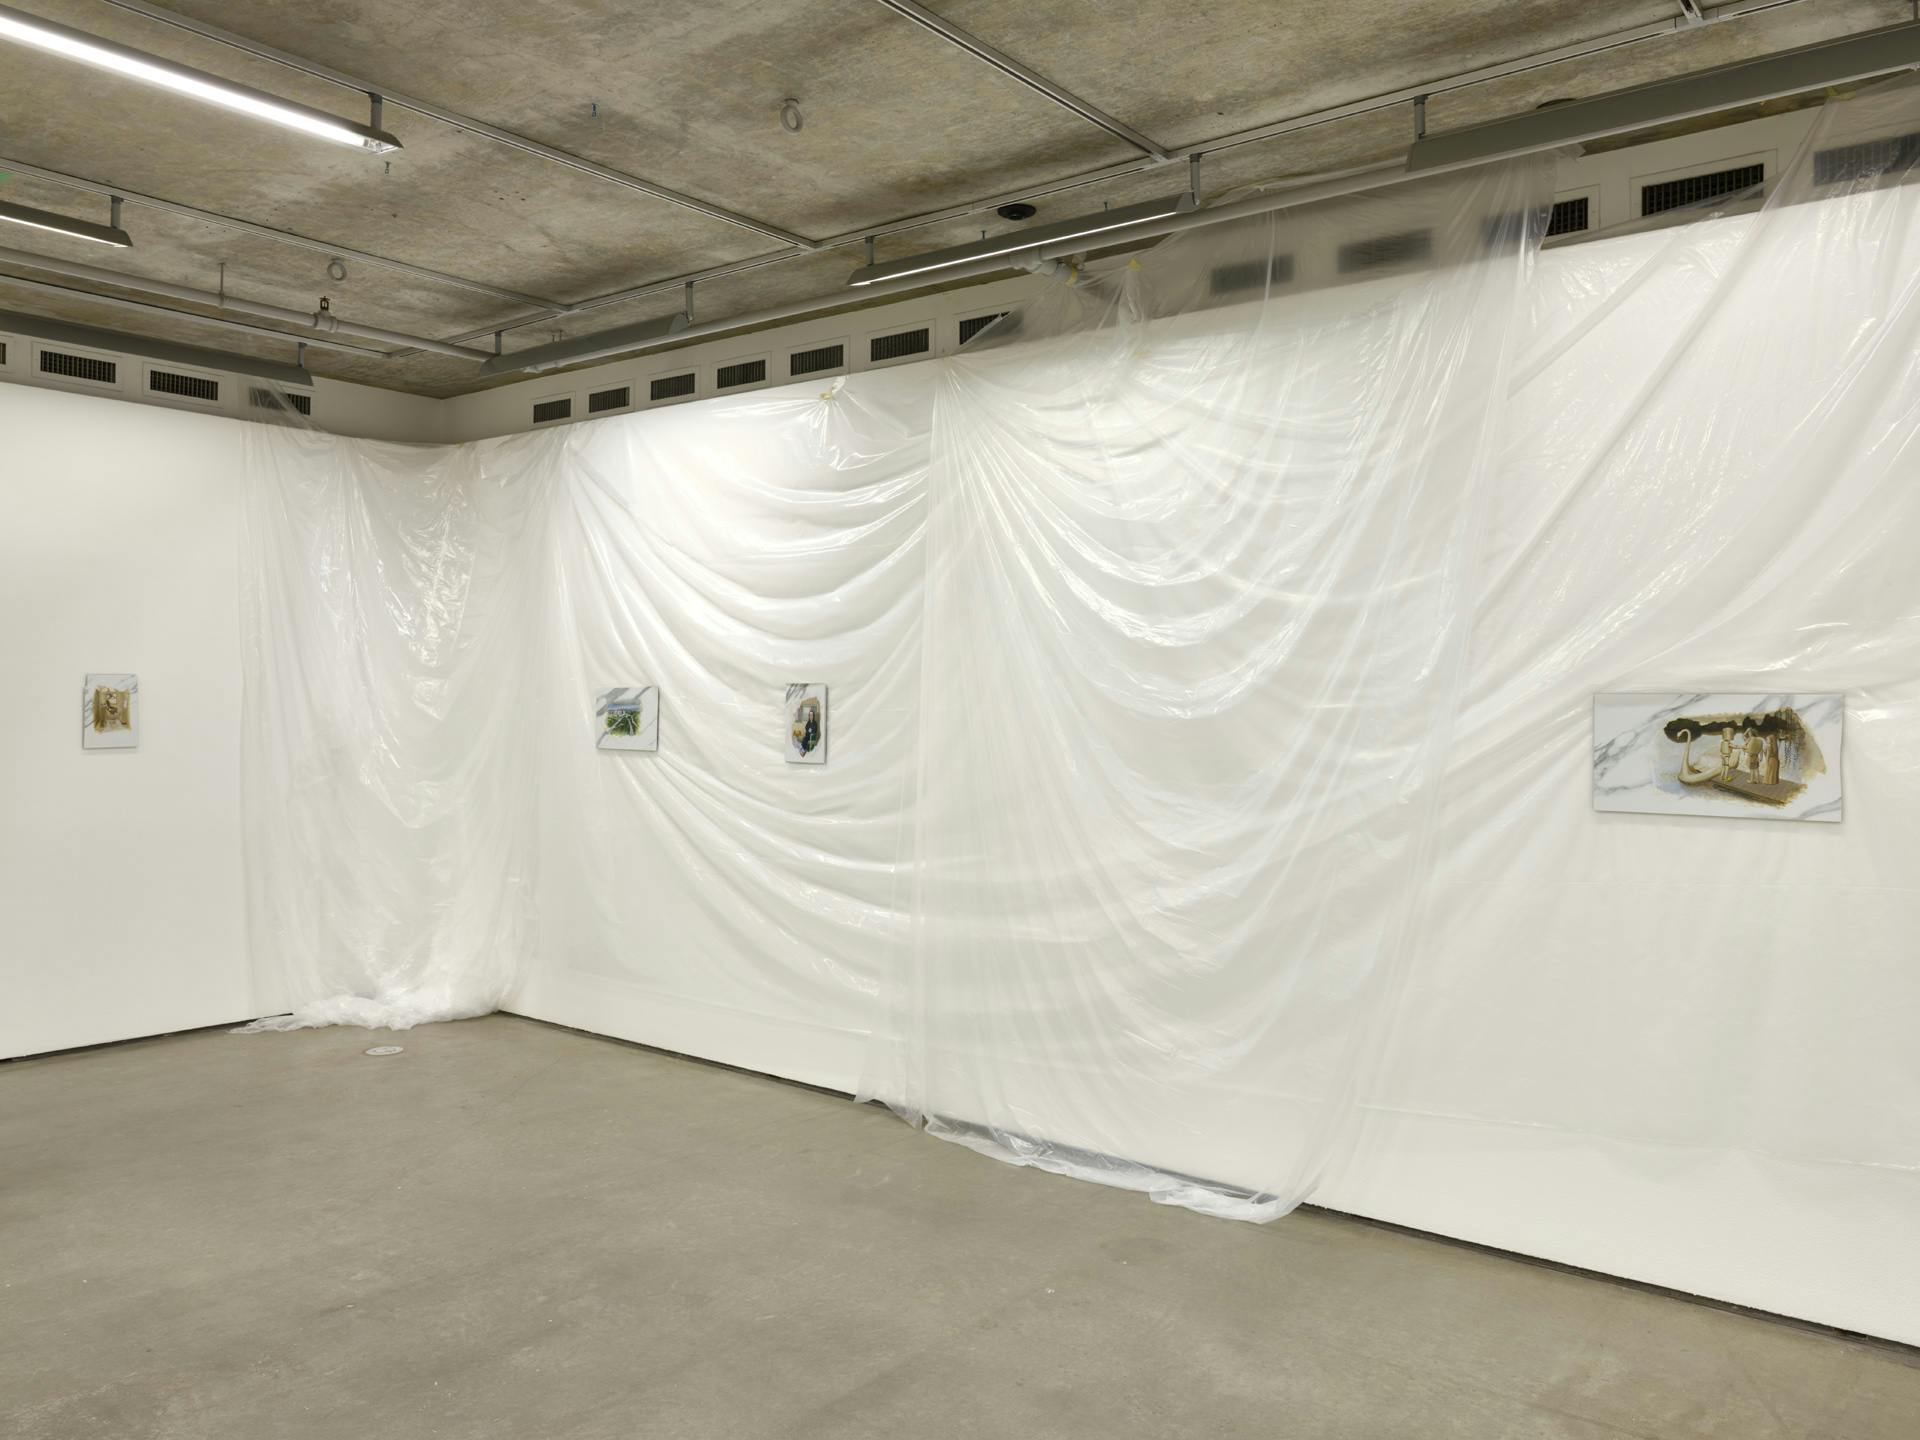 Four small paintings on faux-marble tiles hang along a gallery wall draped with translucent plastic sheets.